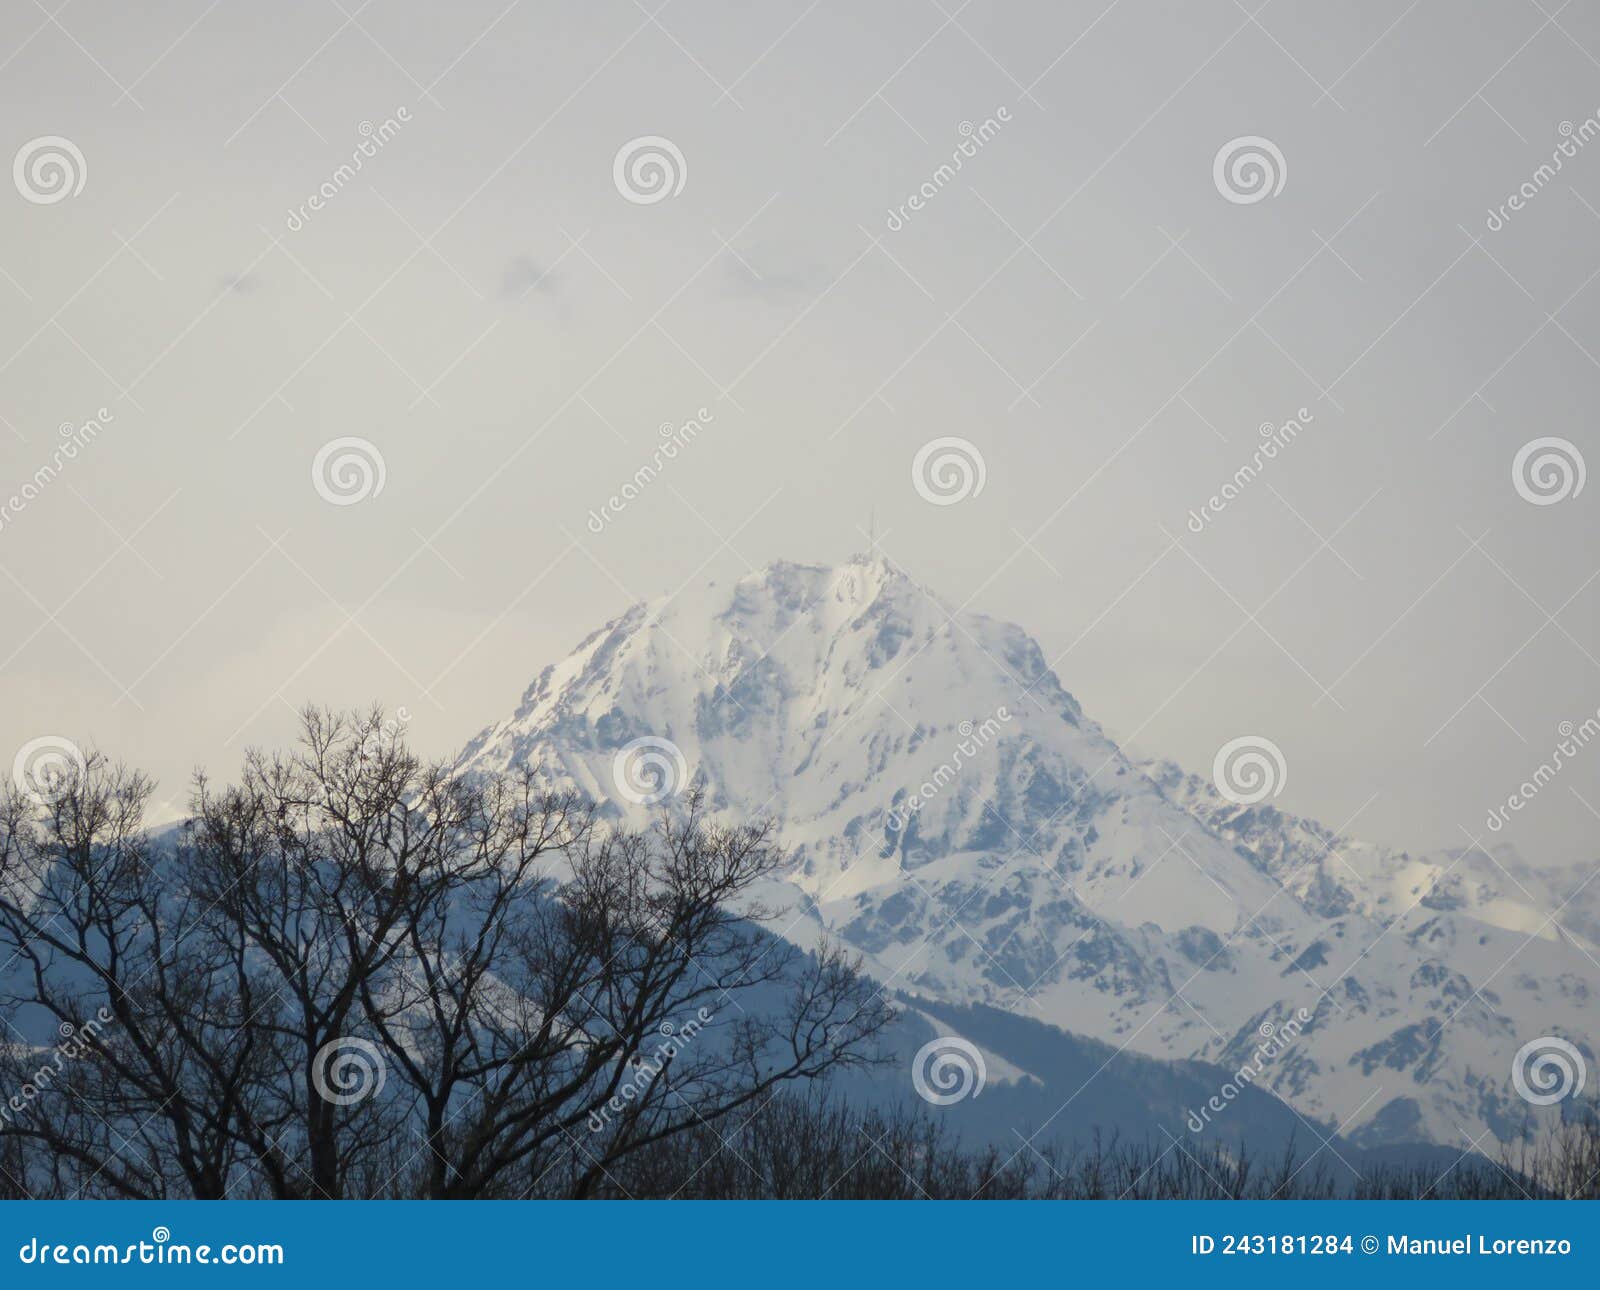 beautiful snow-capped mountains height remoteness immensity landscape